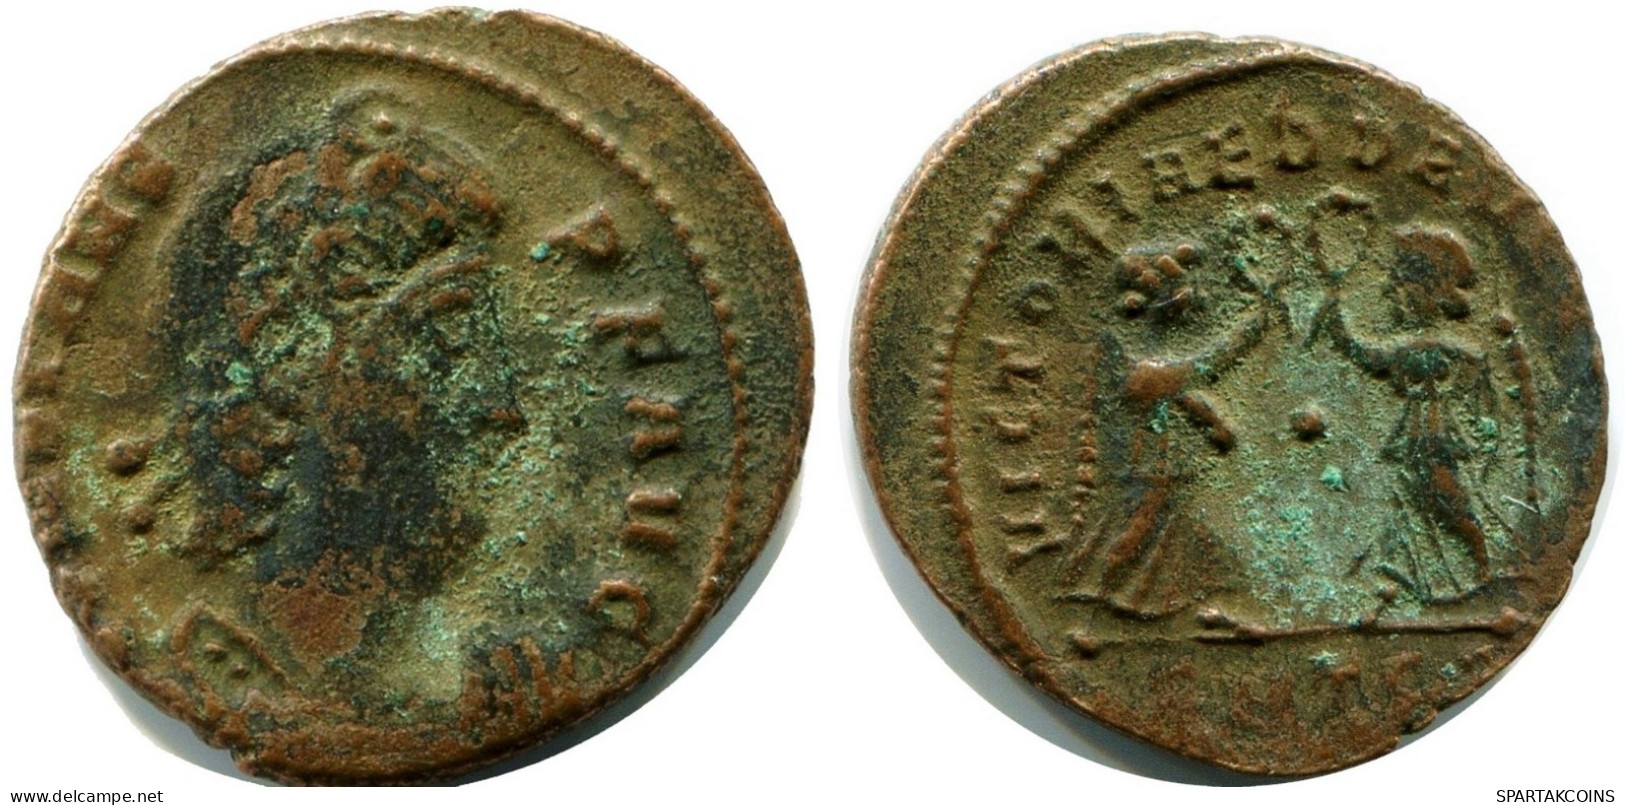 CONSTANS MINTED IN THESSALONICA FROM THE ROYAL ONTARIO MUSEUM #ANC11907.14.U.A - The Christian Empire (307 AD Tot 363 AD)